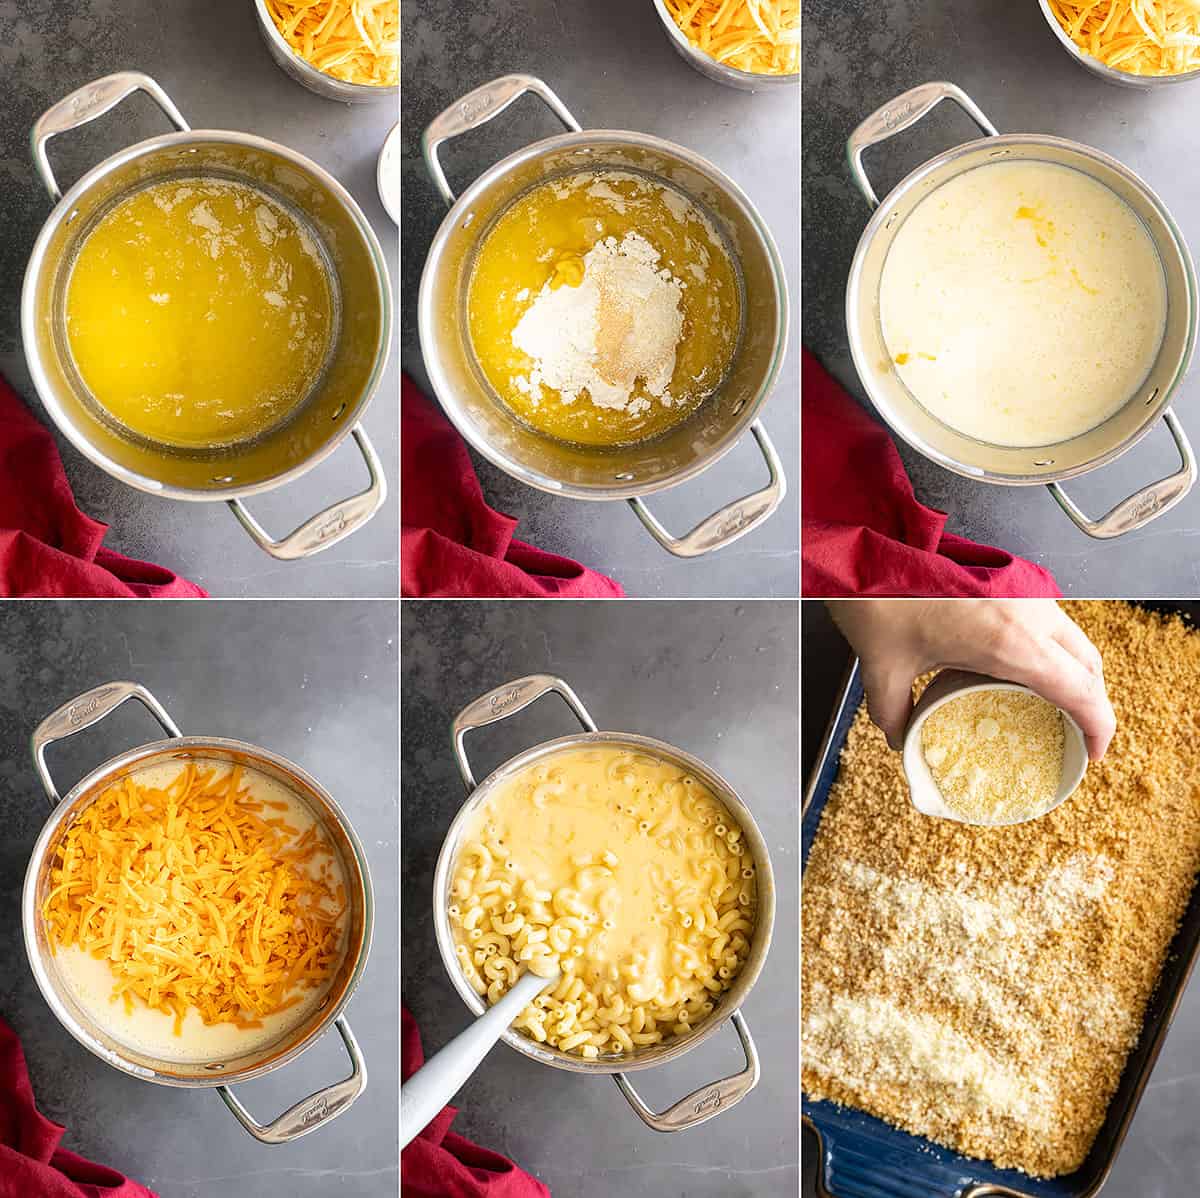 Six pictures showing how to make the pasta dish.